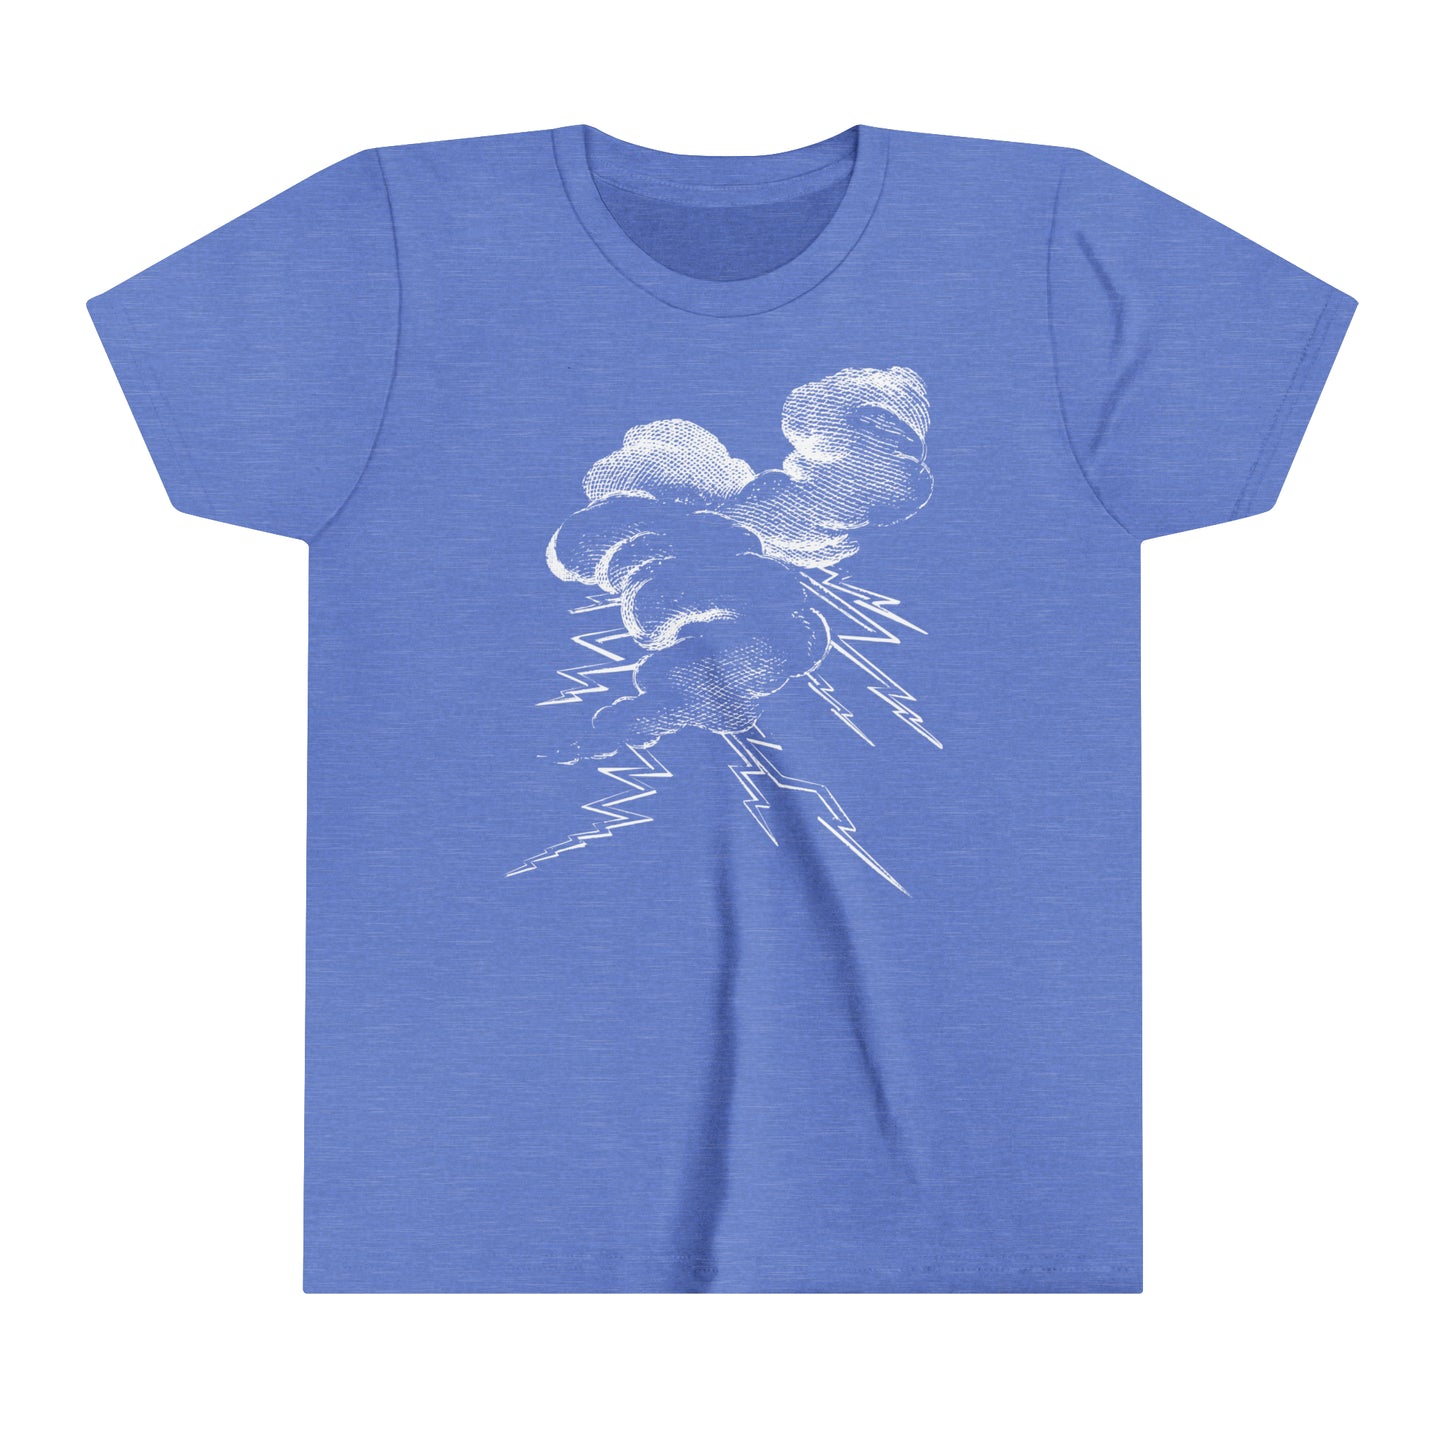 Large Charge in White Front Print Soft, Lightweight Cotton Kids Tee